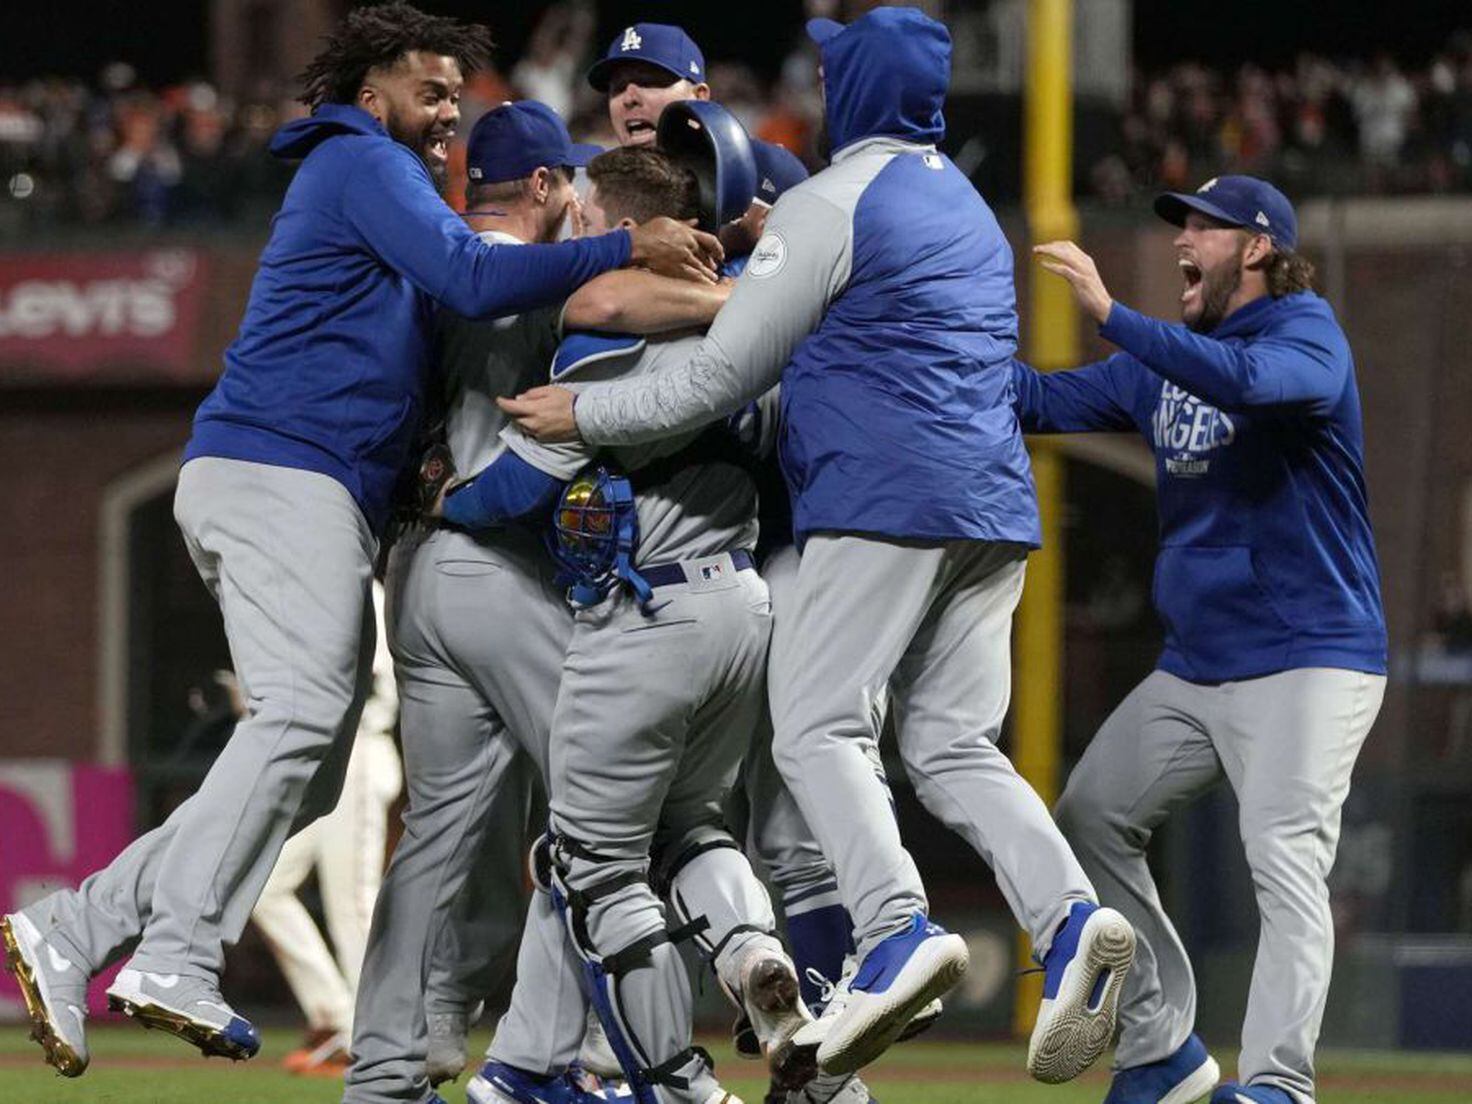 Los Angeles Dodgers beat San Francisco Giants 2-1 in playoff